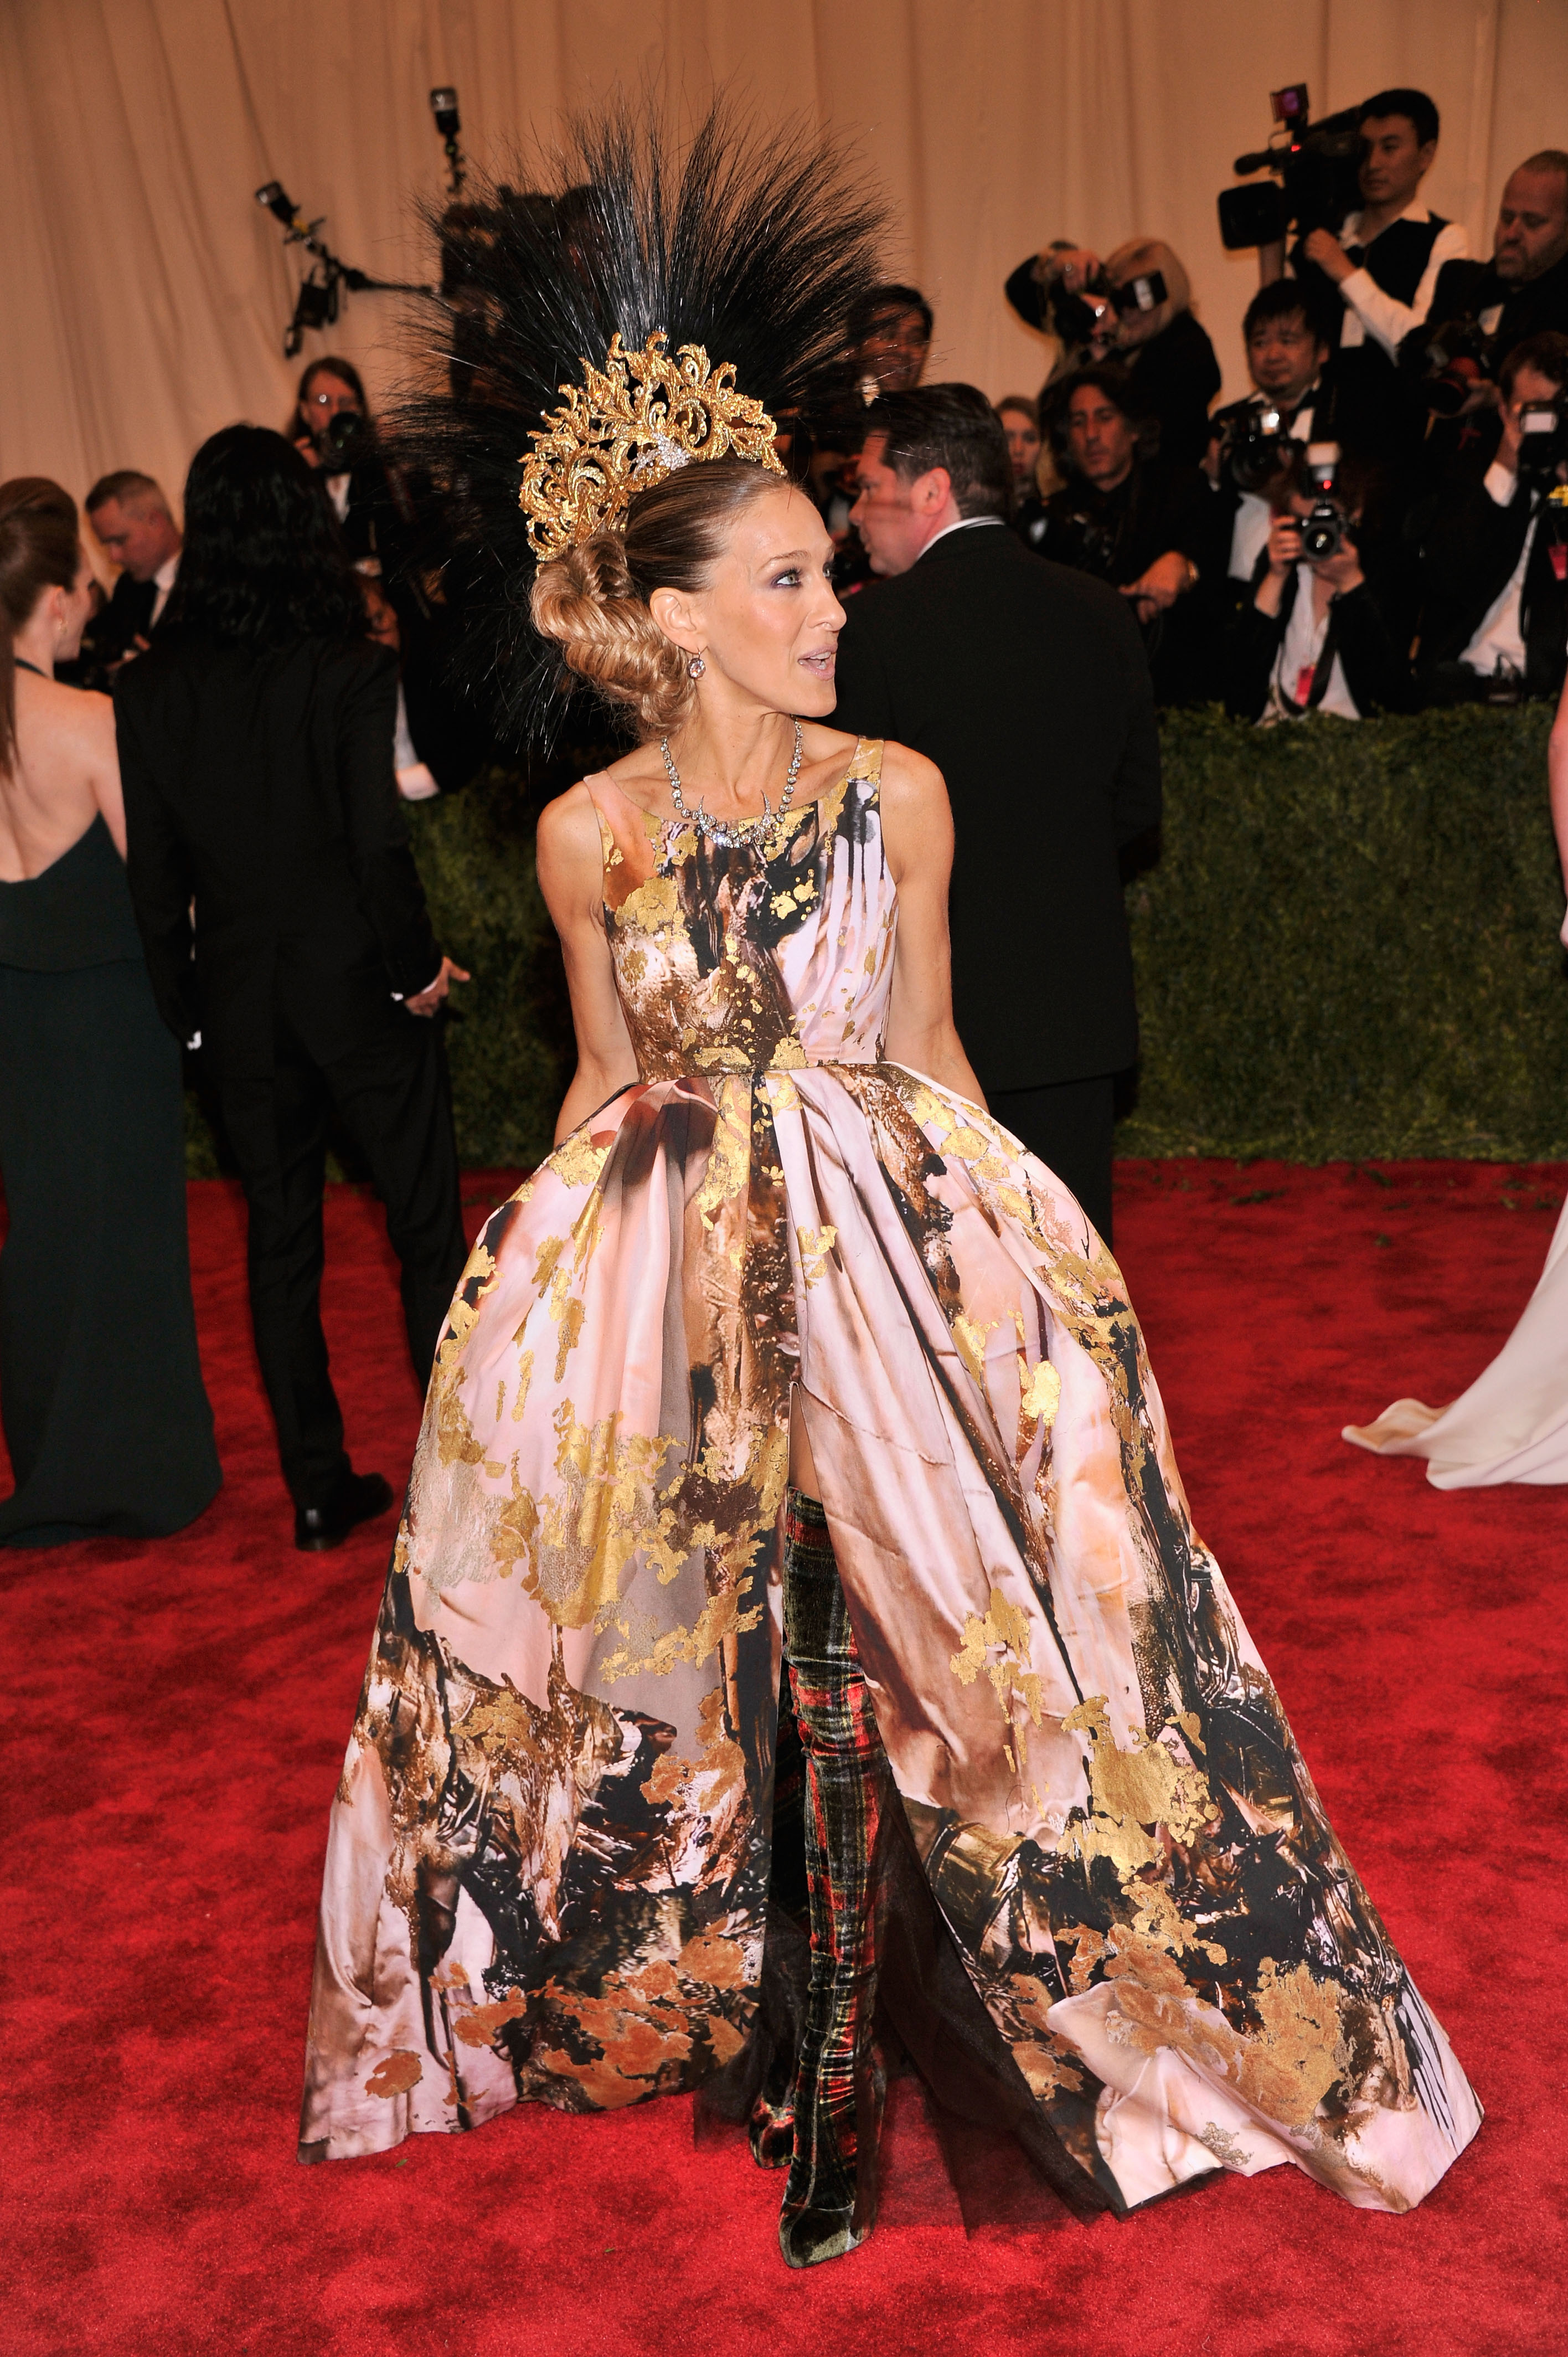 Sarah Jessica Parker attends the Met Gala with the theme, "PUNK: Chaos to Couture," at the Metropolitan Museum of Art on May 6, 2013, in New York City. | Source: Getty Images